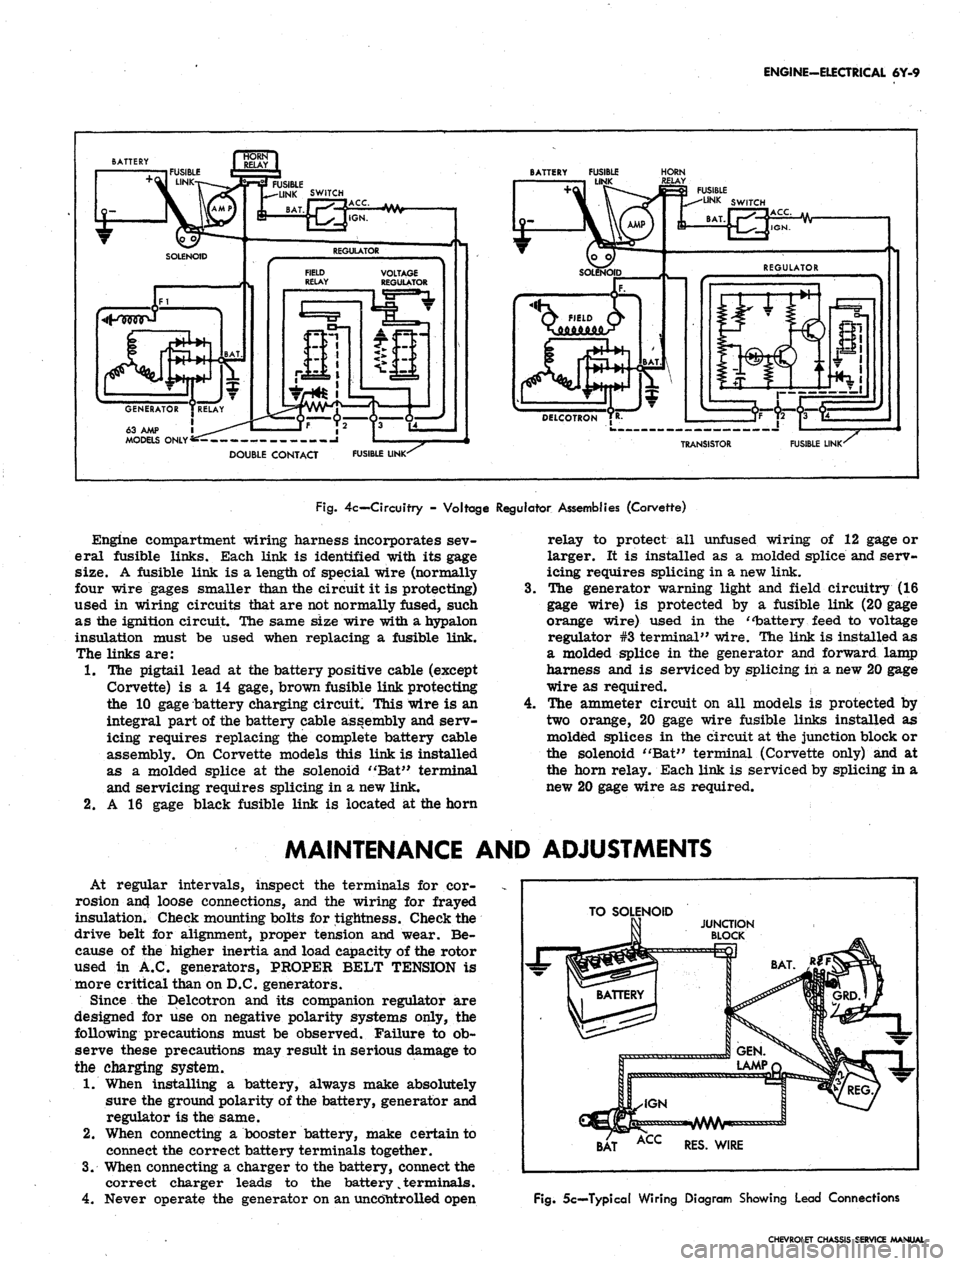 CHEVROLET CAMARO 1967 1.G Chassis Service Manual 
ENGINE-ELECTRICAL 6Y-9

63 AMP 1

MODELS ONLY 
BATTERY FUSIBLE

LINK 
HORN

FUSIBLE LINK 
TRANSISTOR 
FUSIBLE LINK

Fig.
 4c— Circuitry - Voltage Regulator Assemblies (Corvette)

Engine compartm